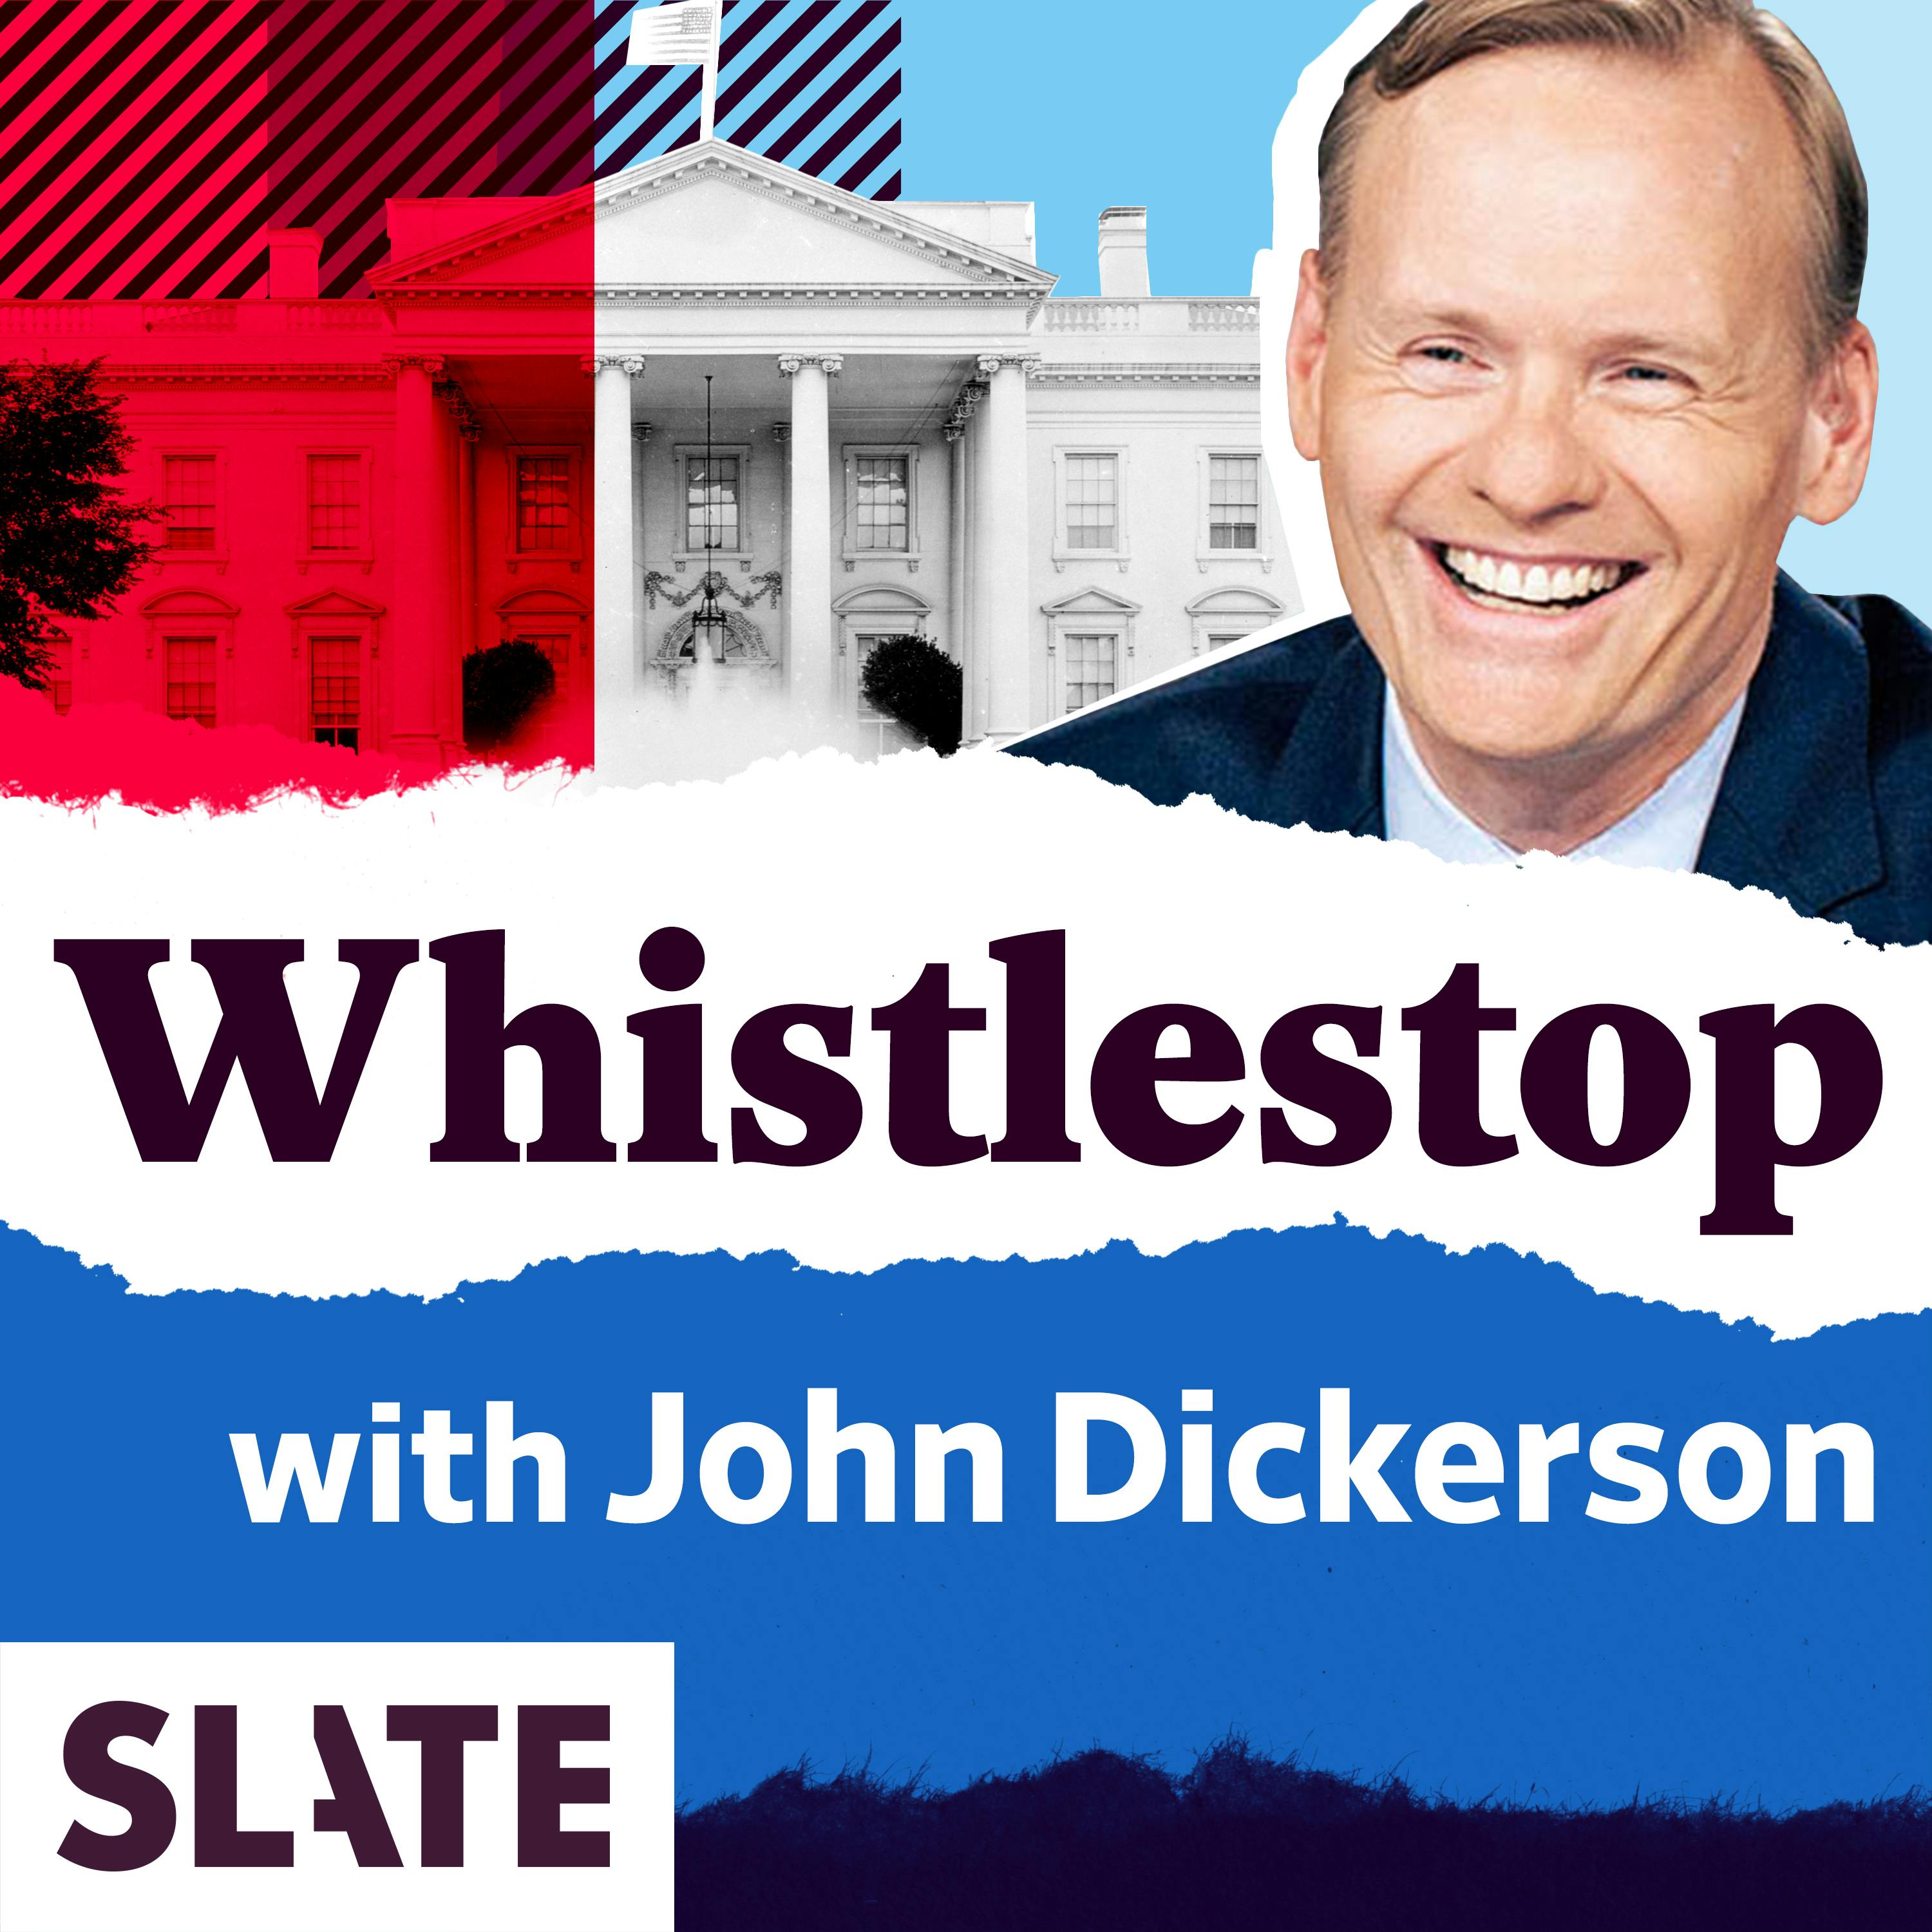 Whistlestop: Presidential History and Trivia